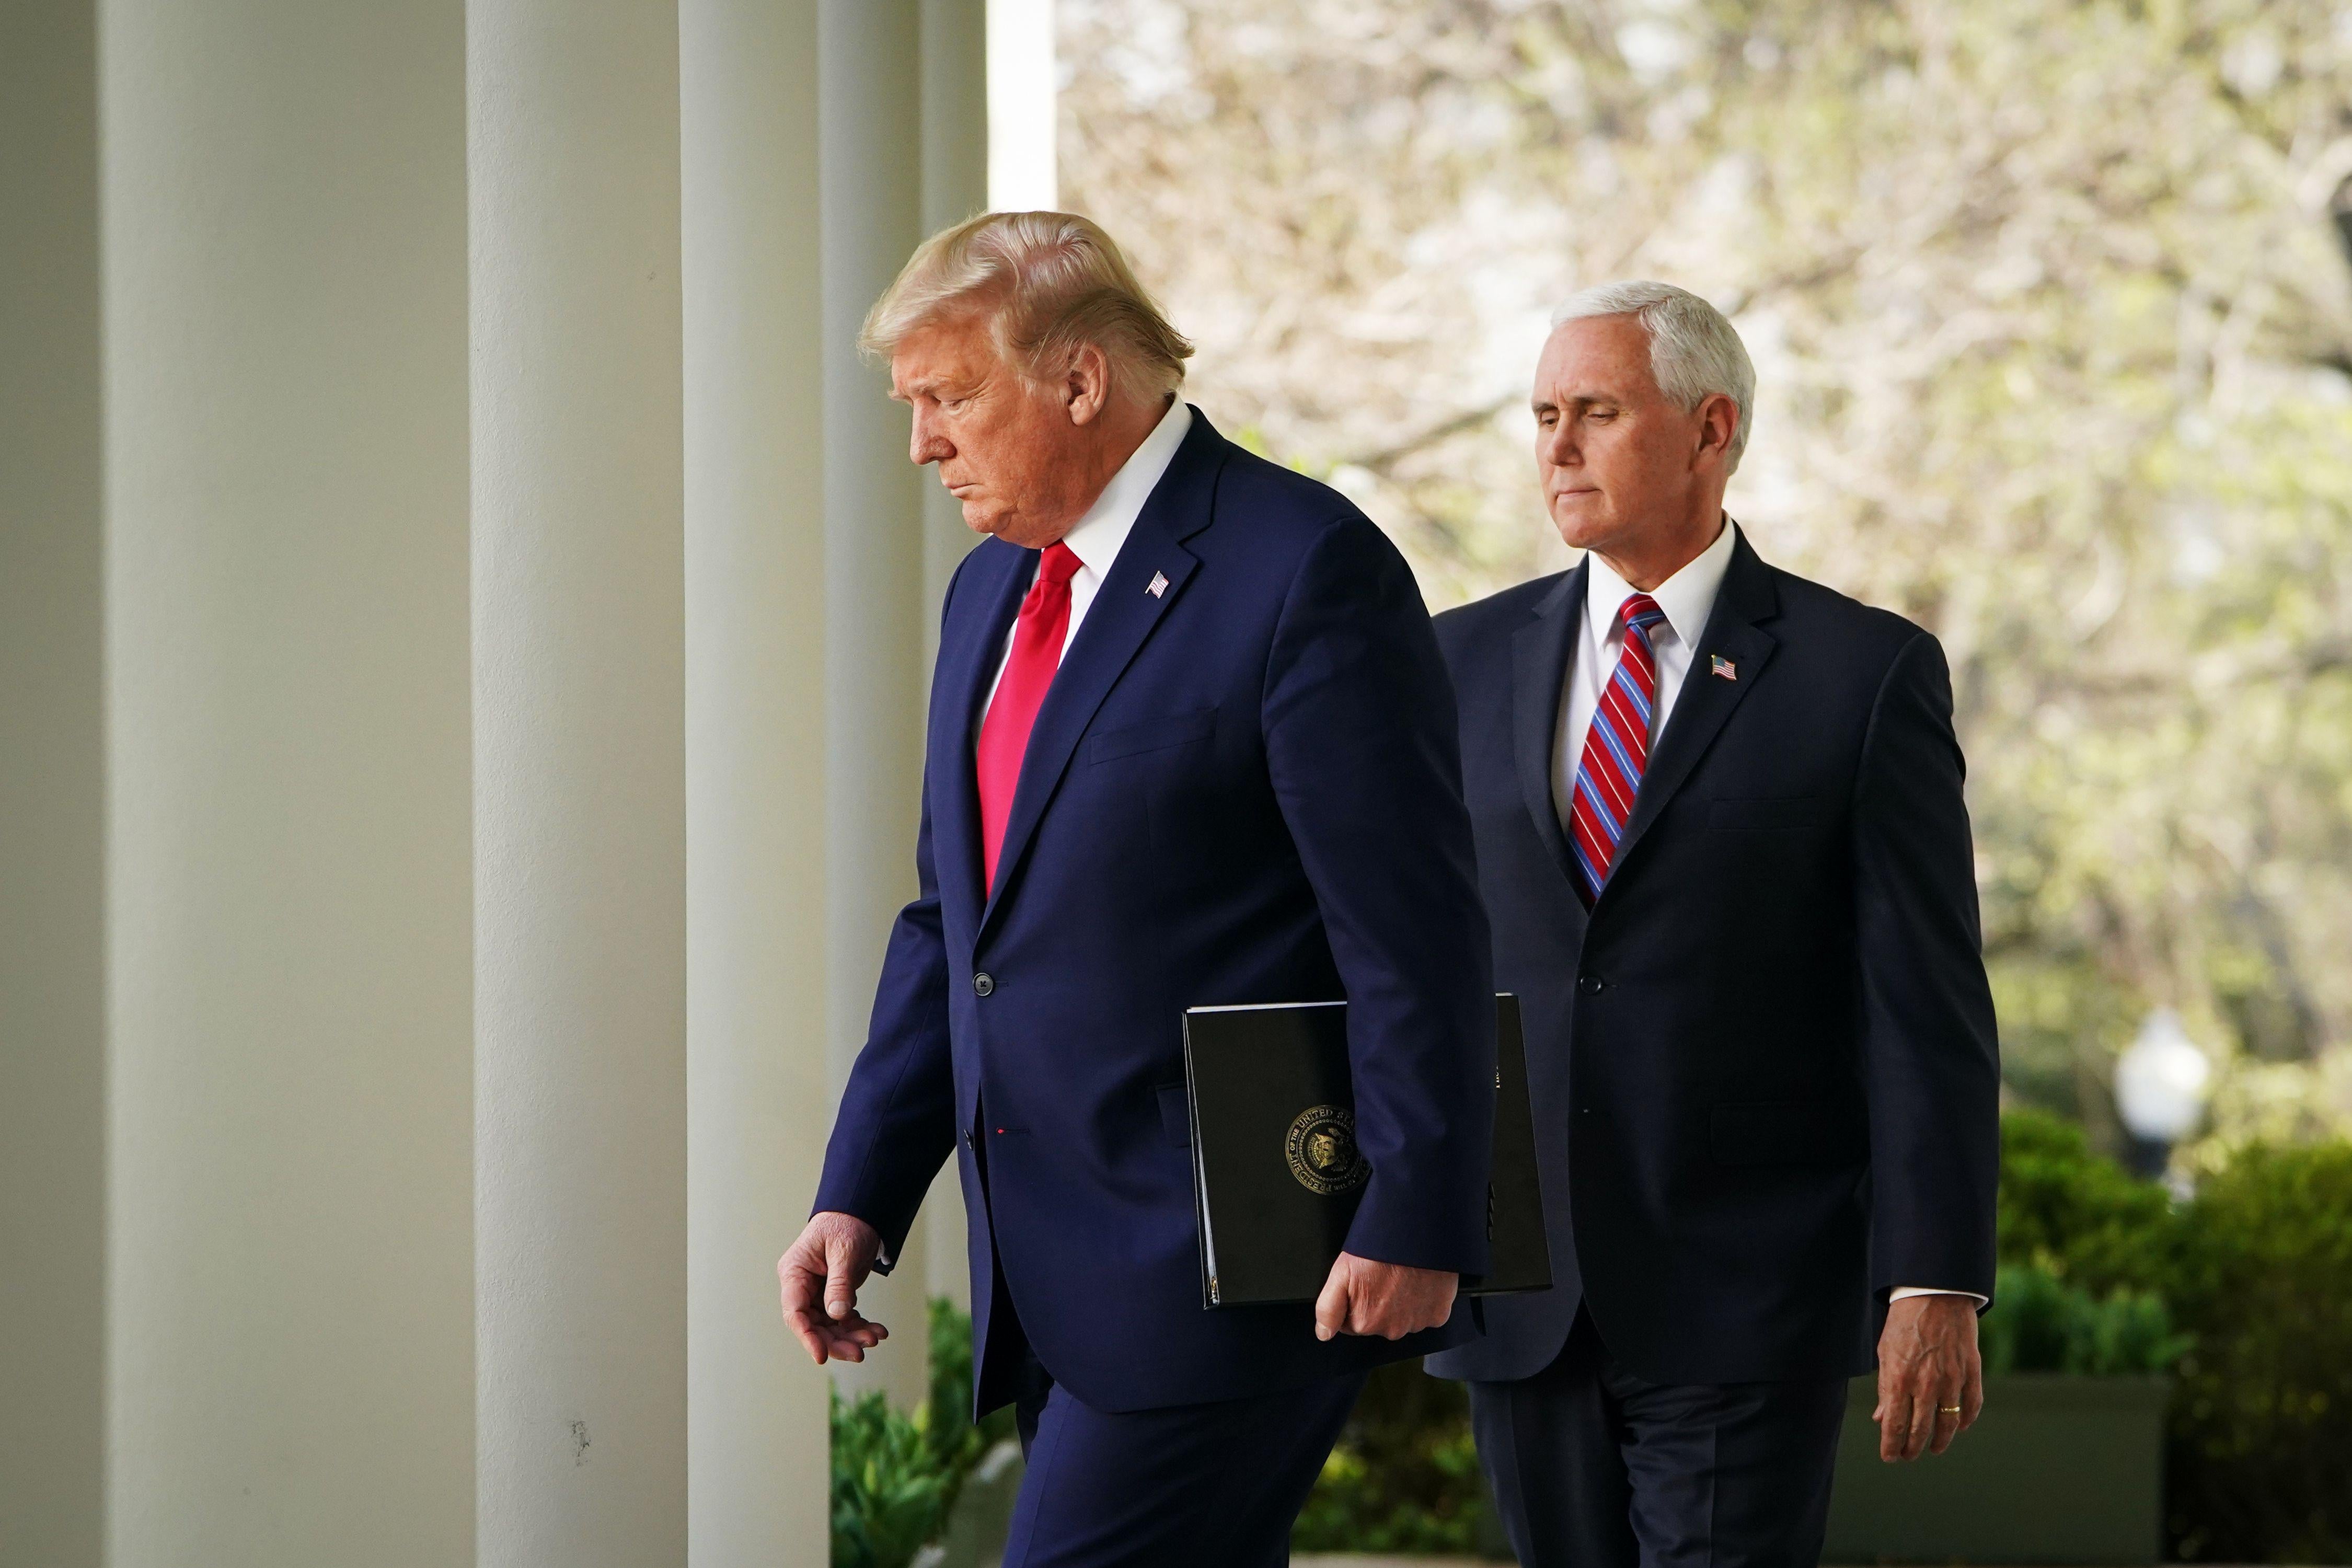 Donald Trump and Mike Pence walk through the colonnade of the White House on Monday.